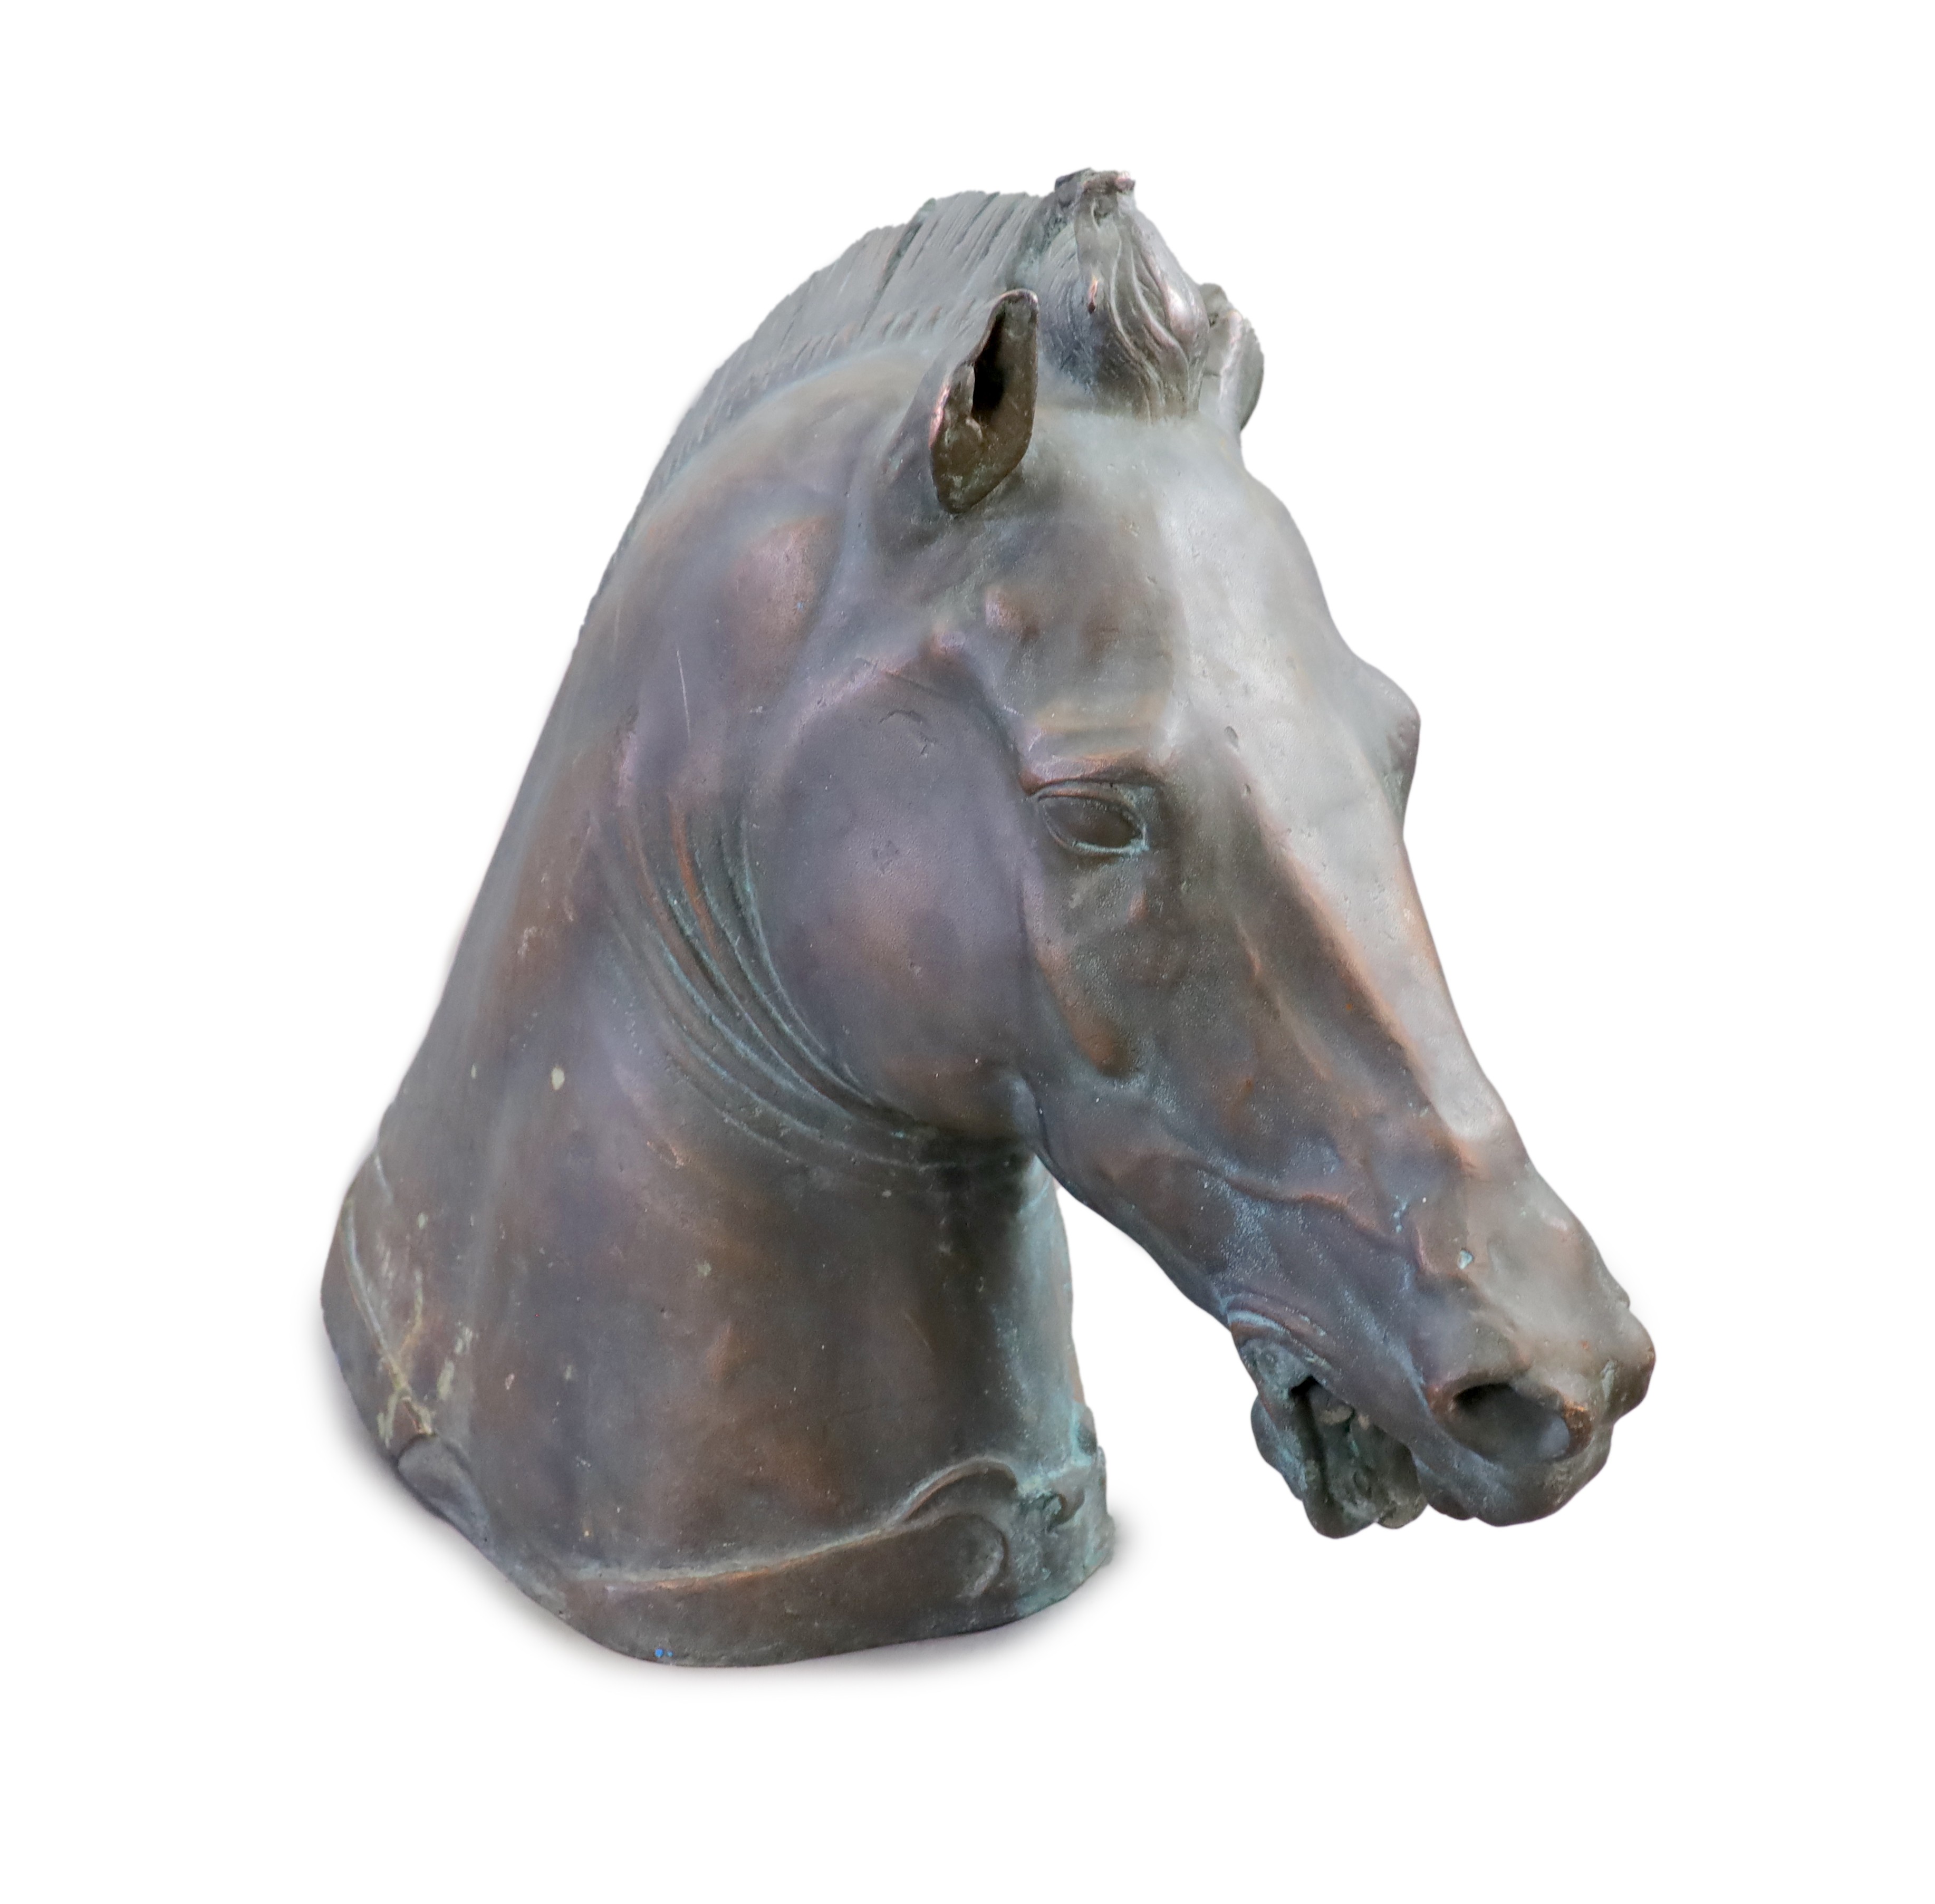 A large and impressive life-size bronze model after the Medici Riccardi horse’s head, 20th century H 80cm. L 97cm.